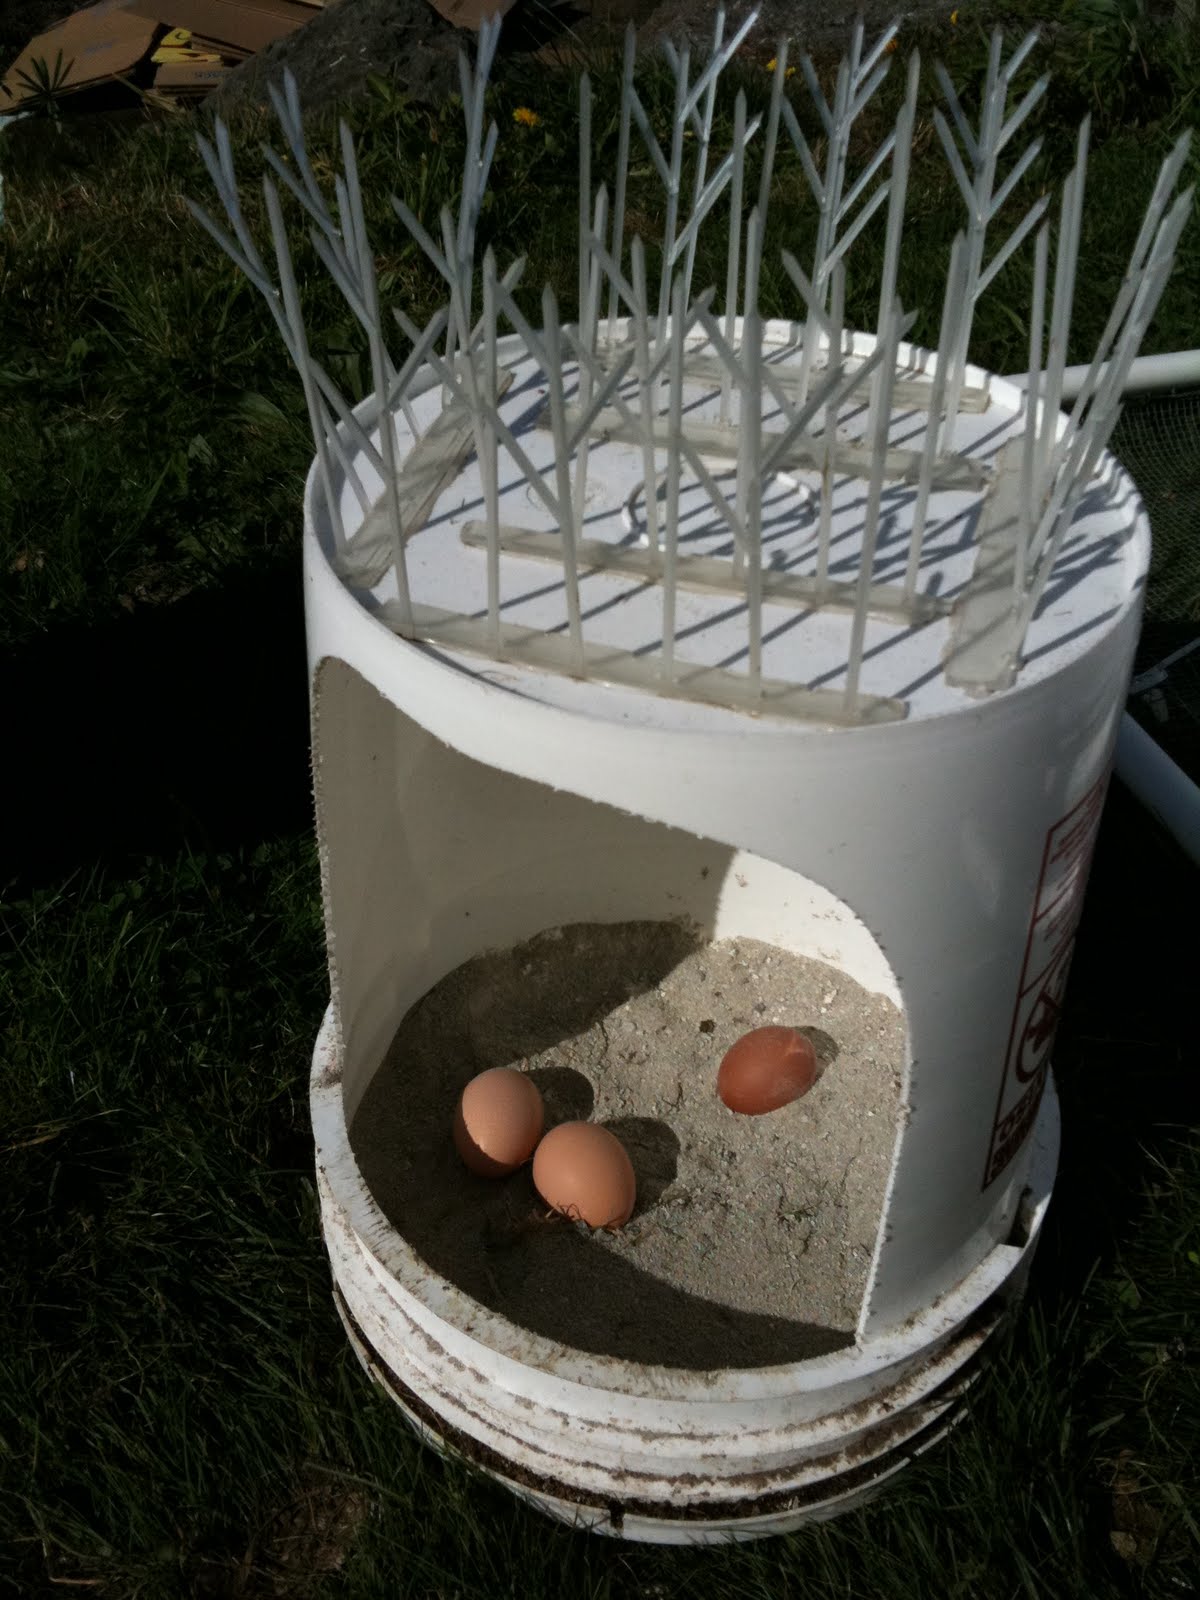 Ah, the joys of “maiden eggs” (as Joel Salatin brands these small ...